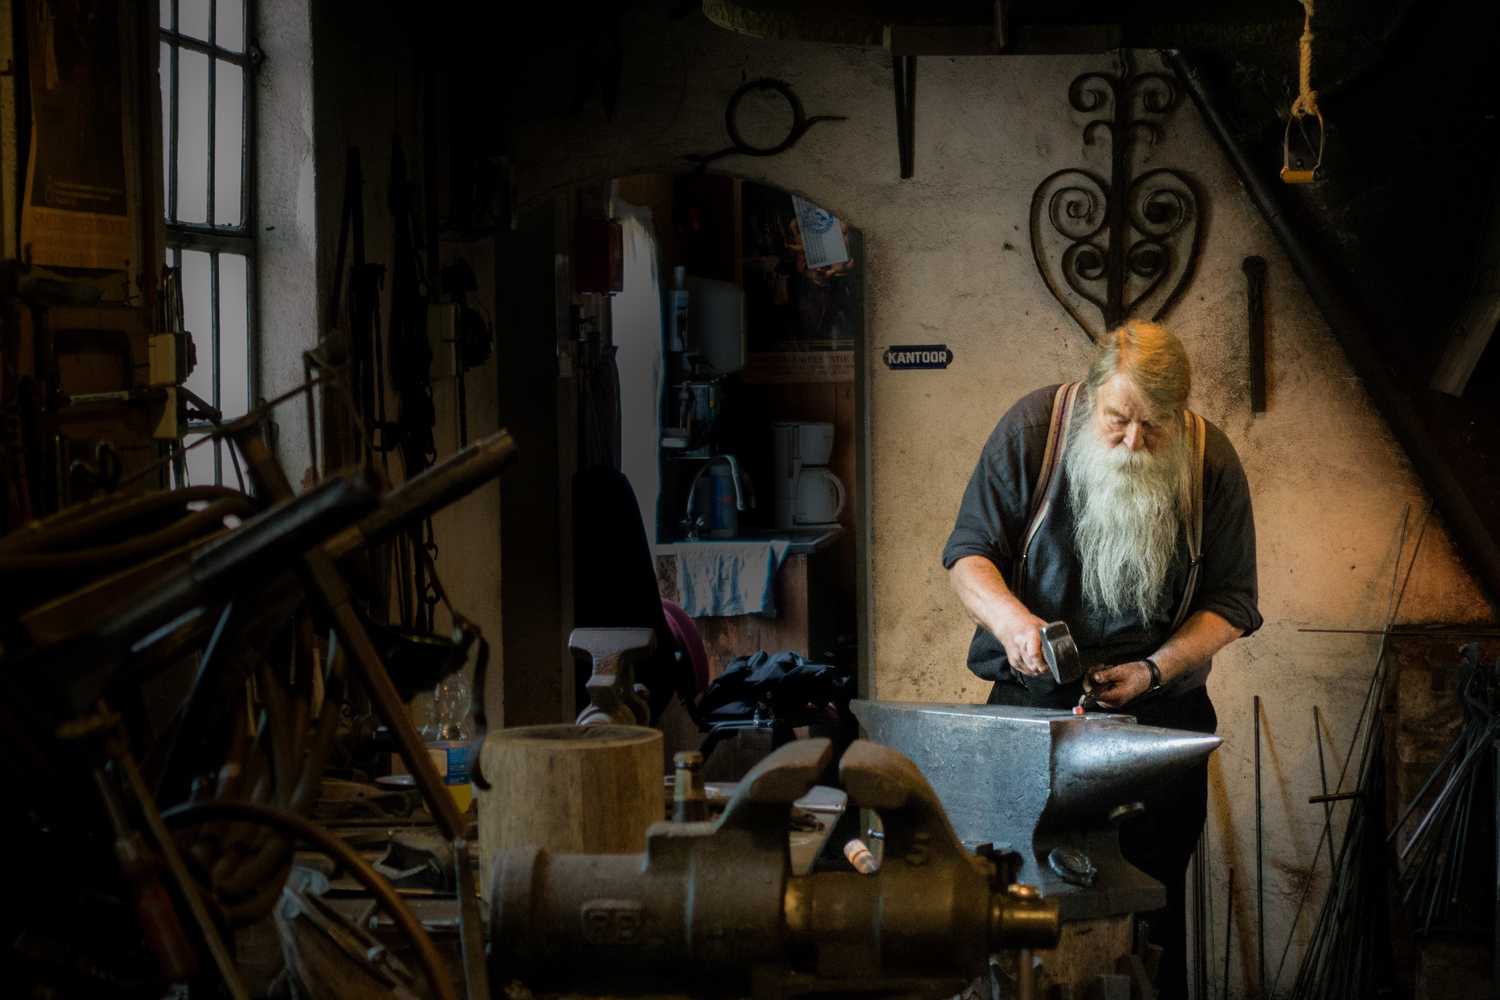 A Master Blacksmith, charting his own course in life